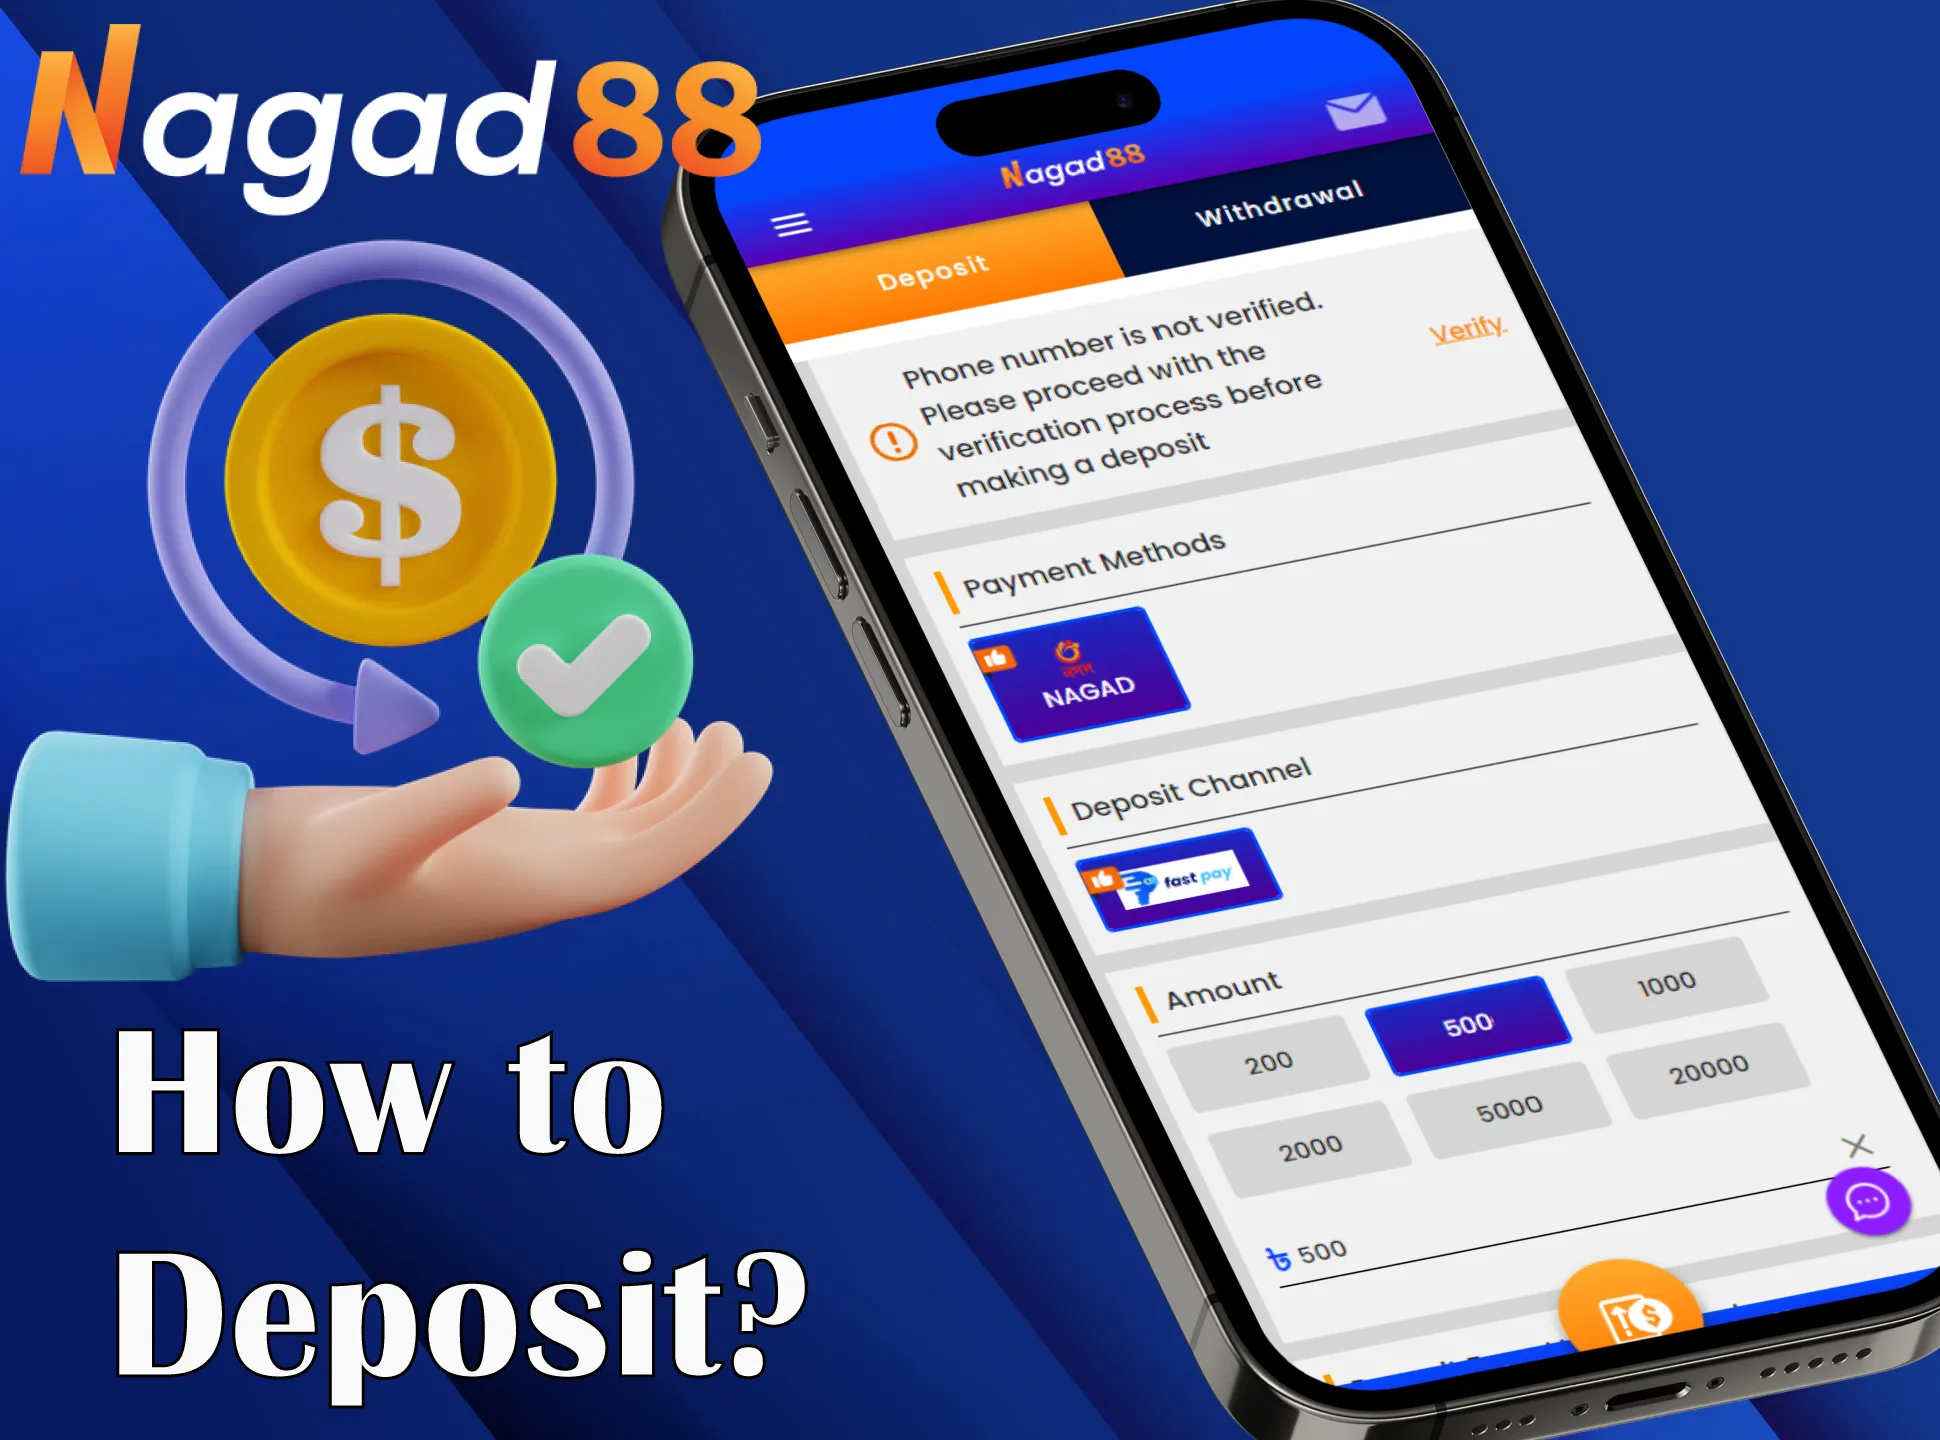 Log in to your Nagad88 account and make a deposit in BDT.